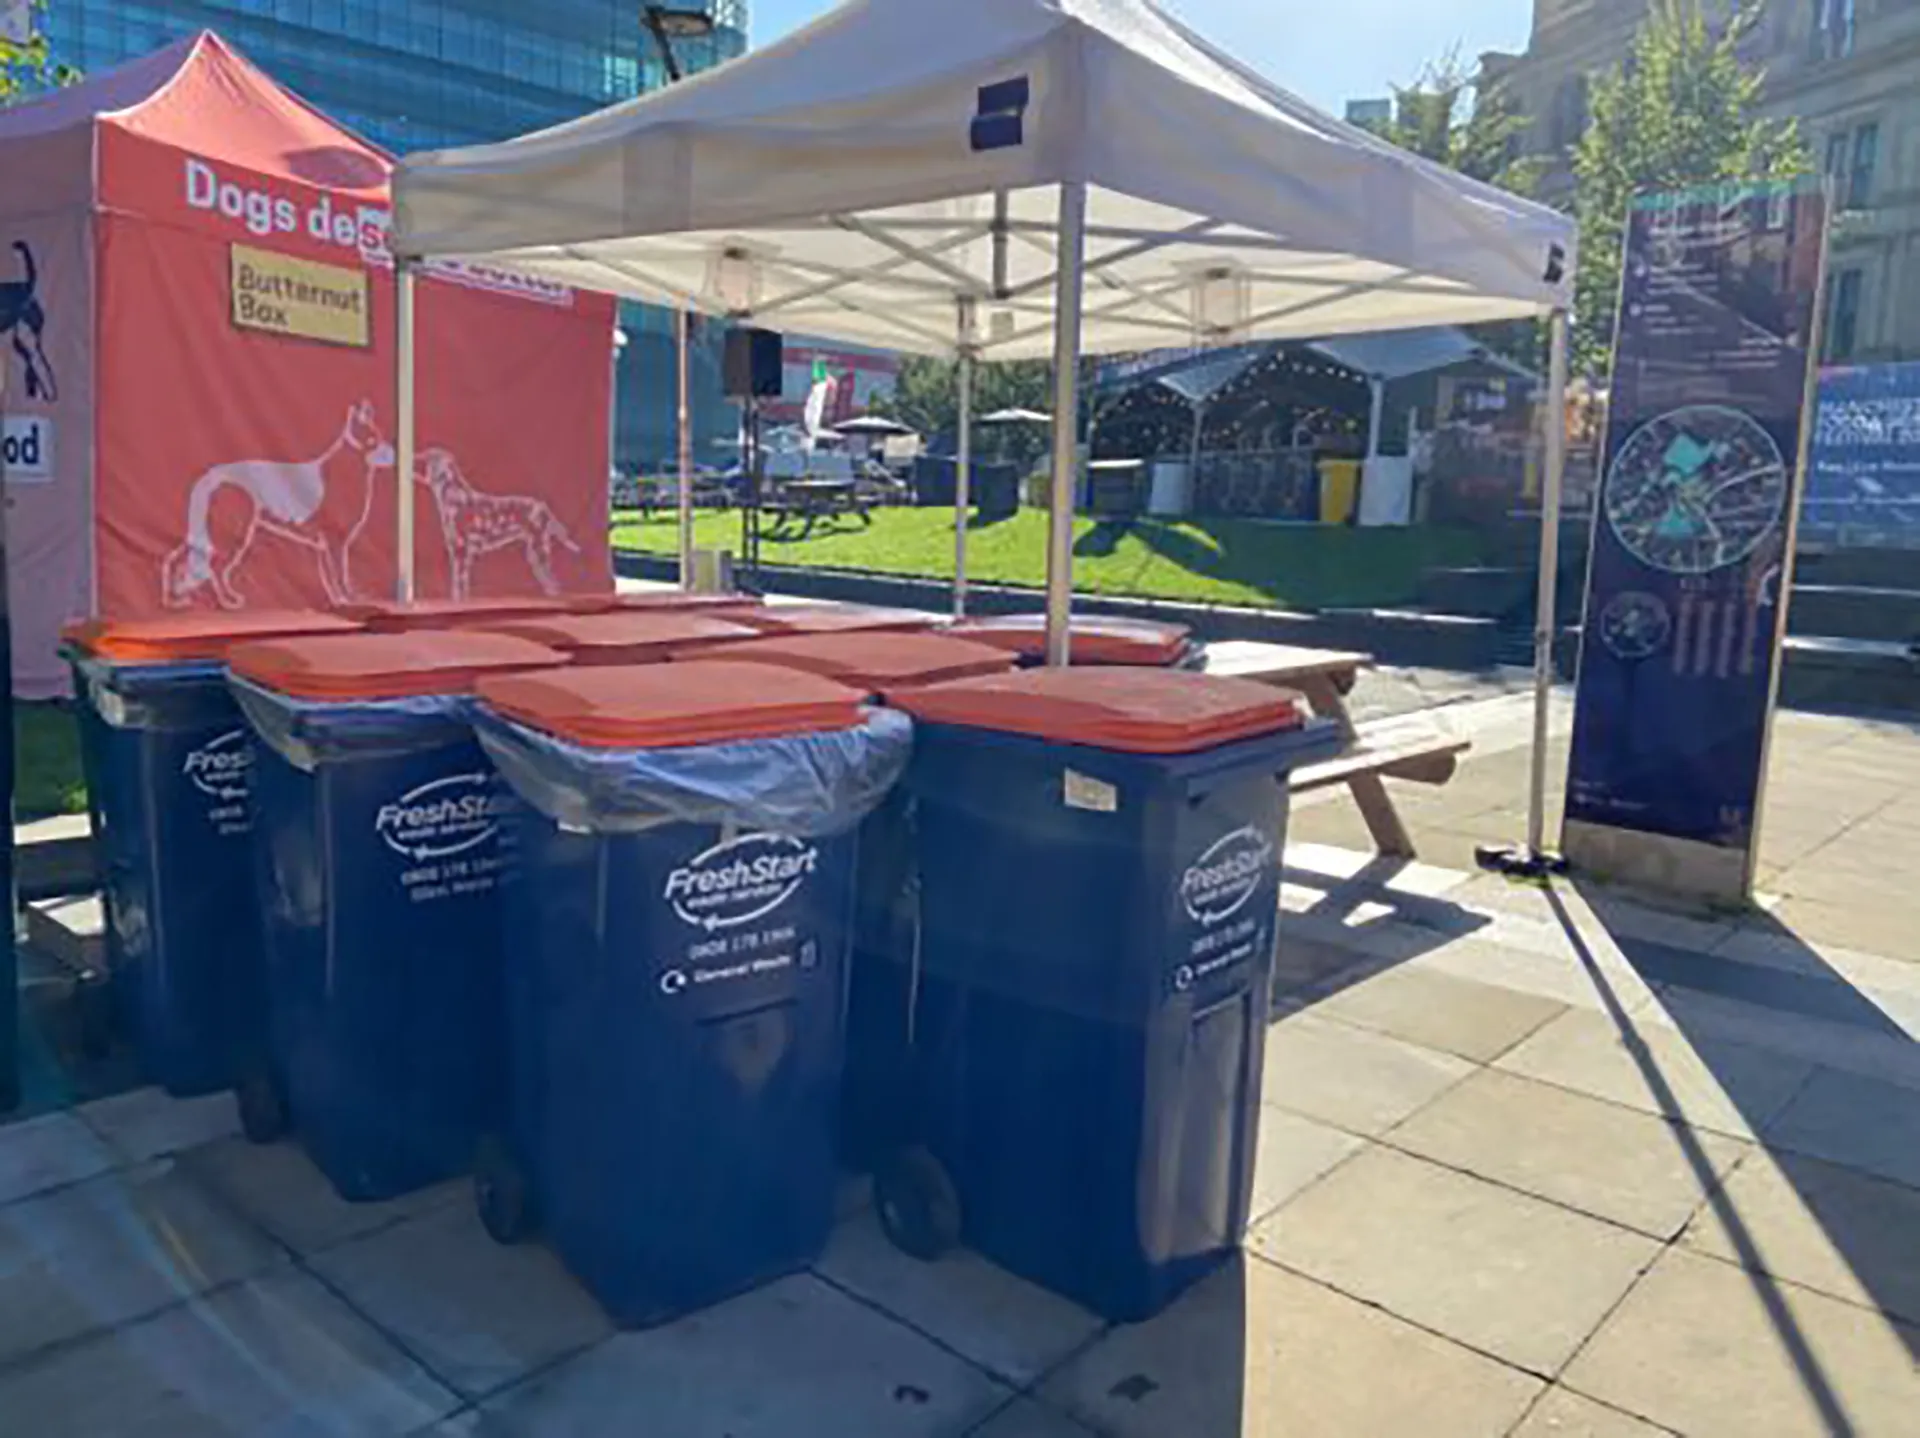 manchester food and drink festival bin collection